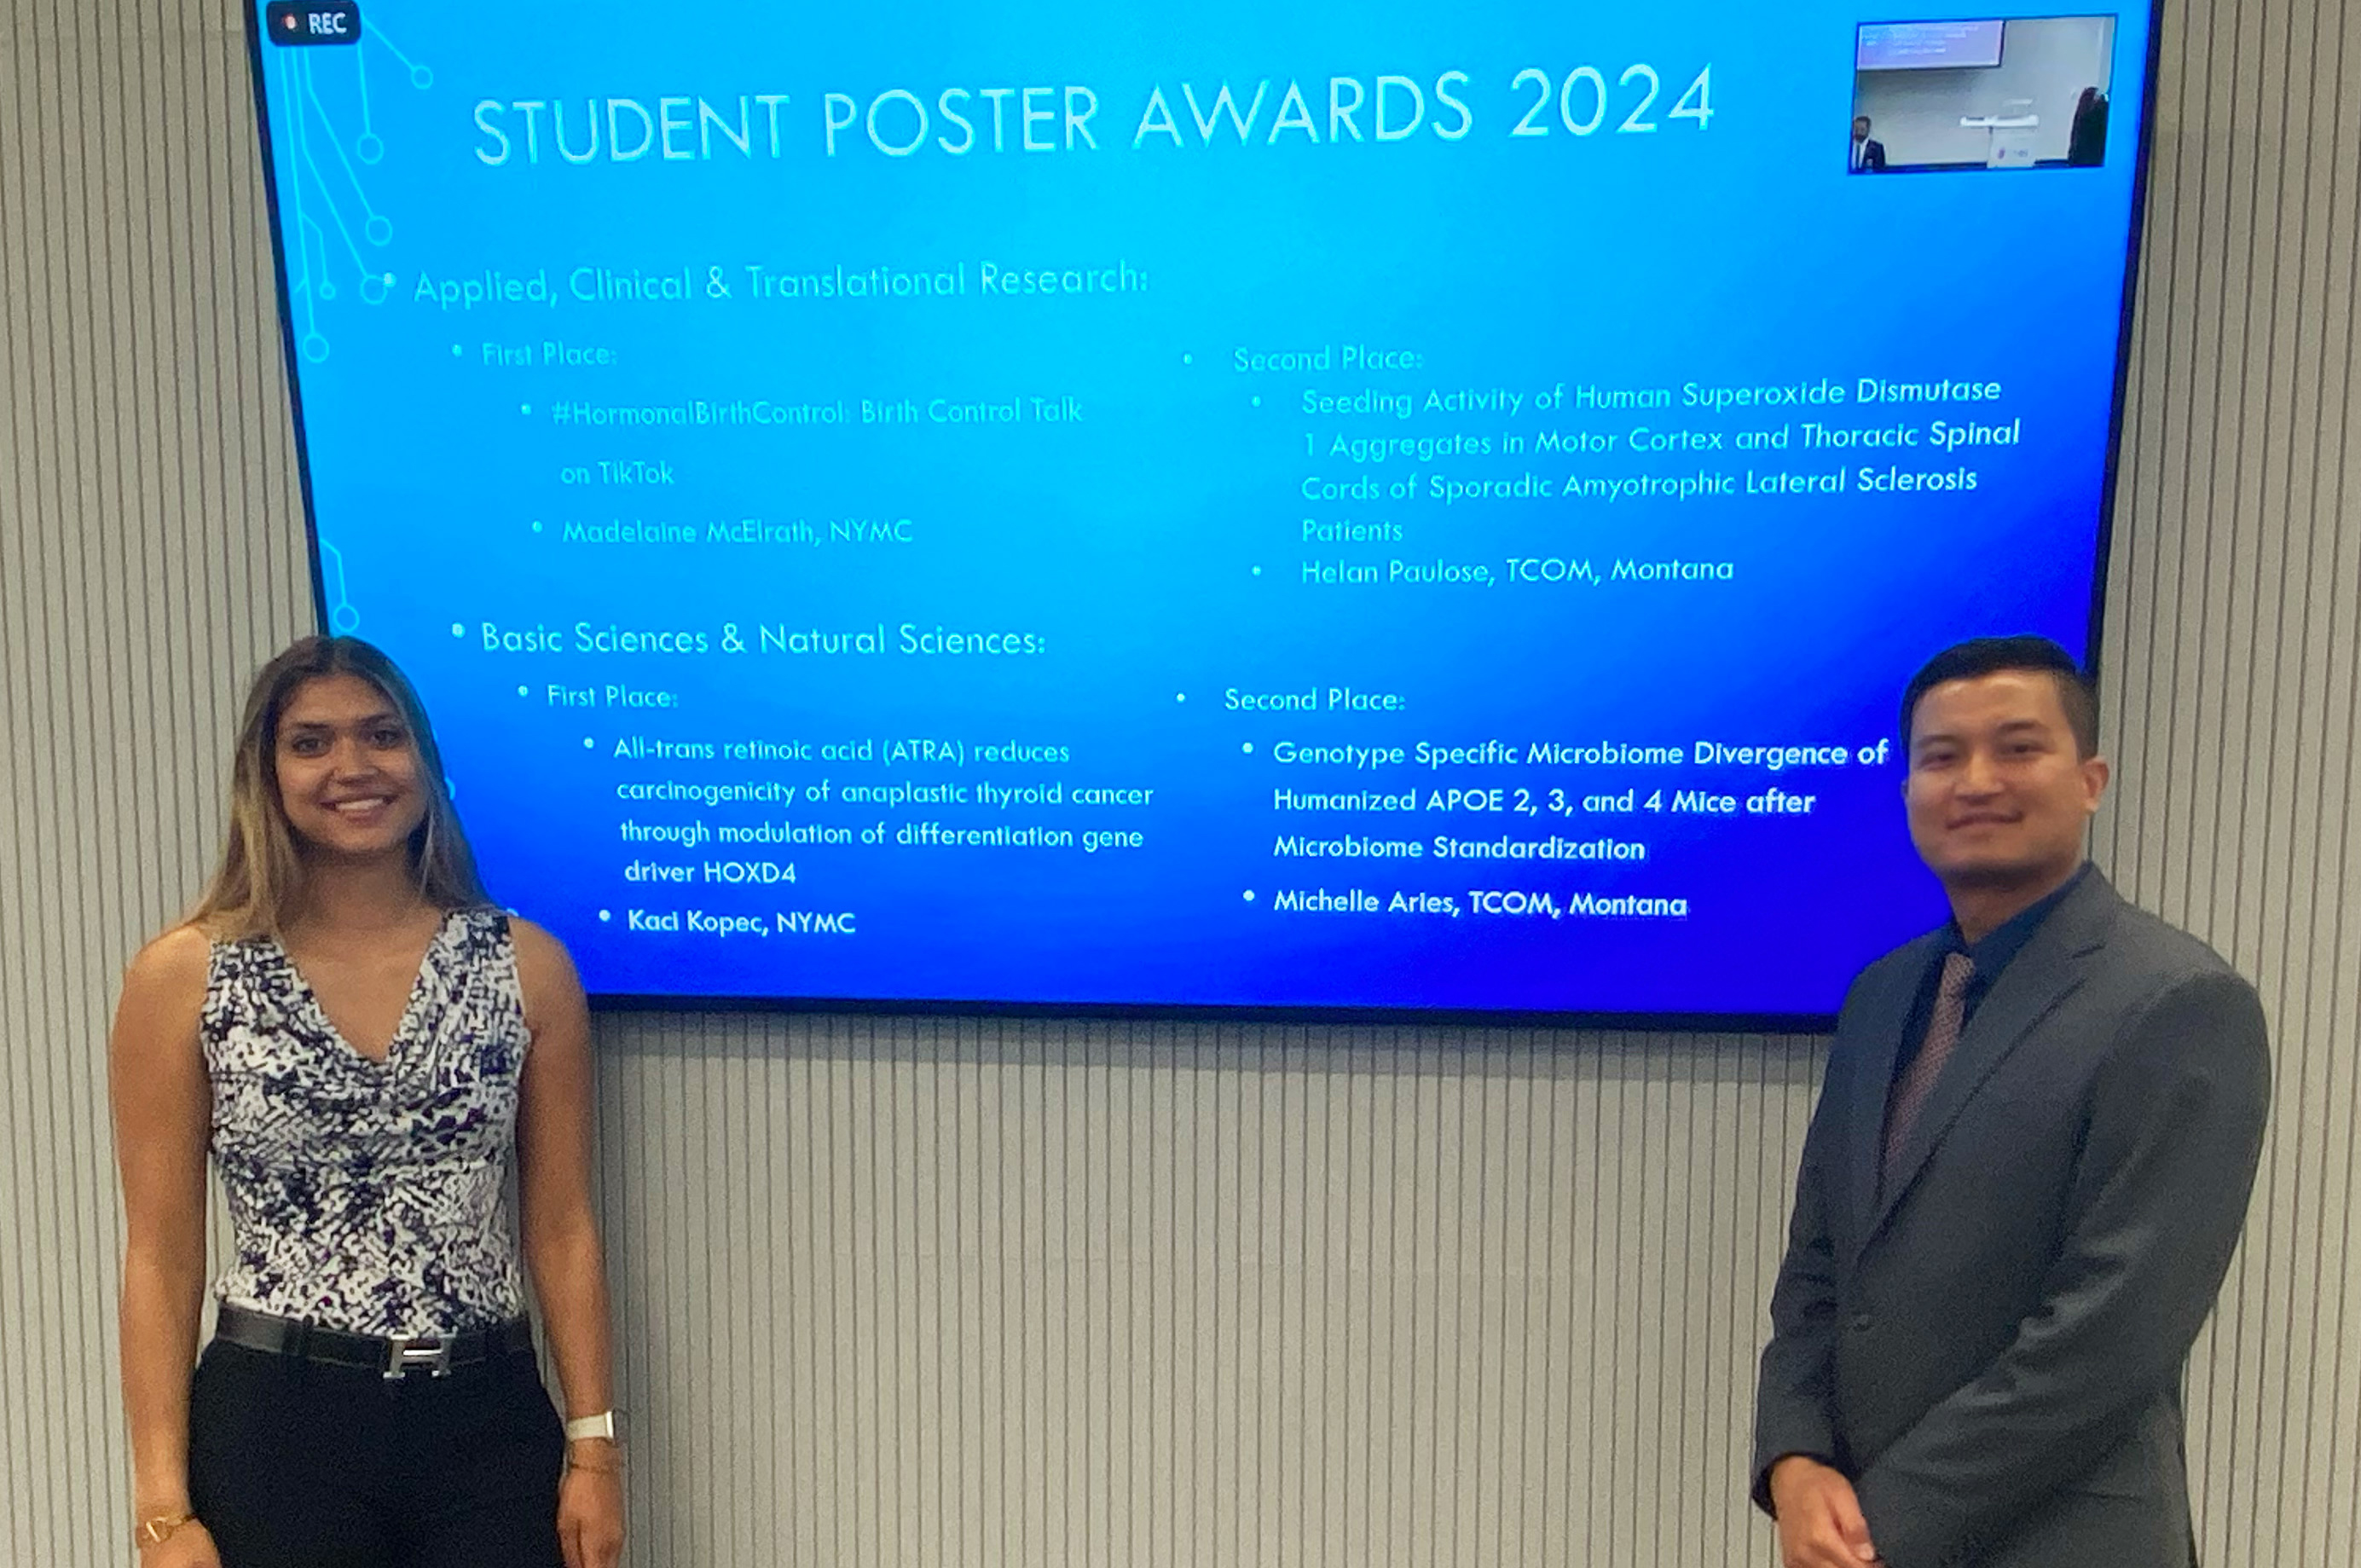 Two students standing in front of a screen for poster presentations.